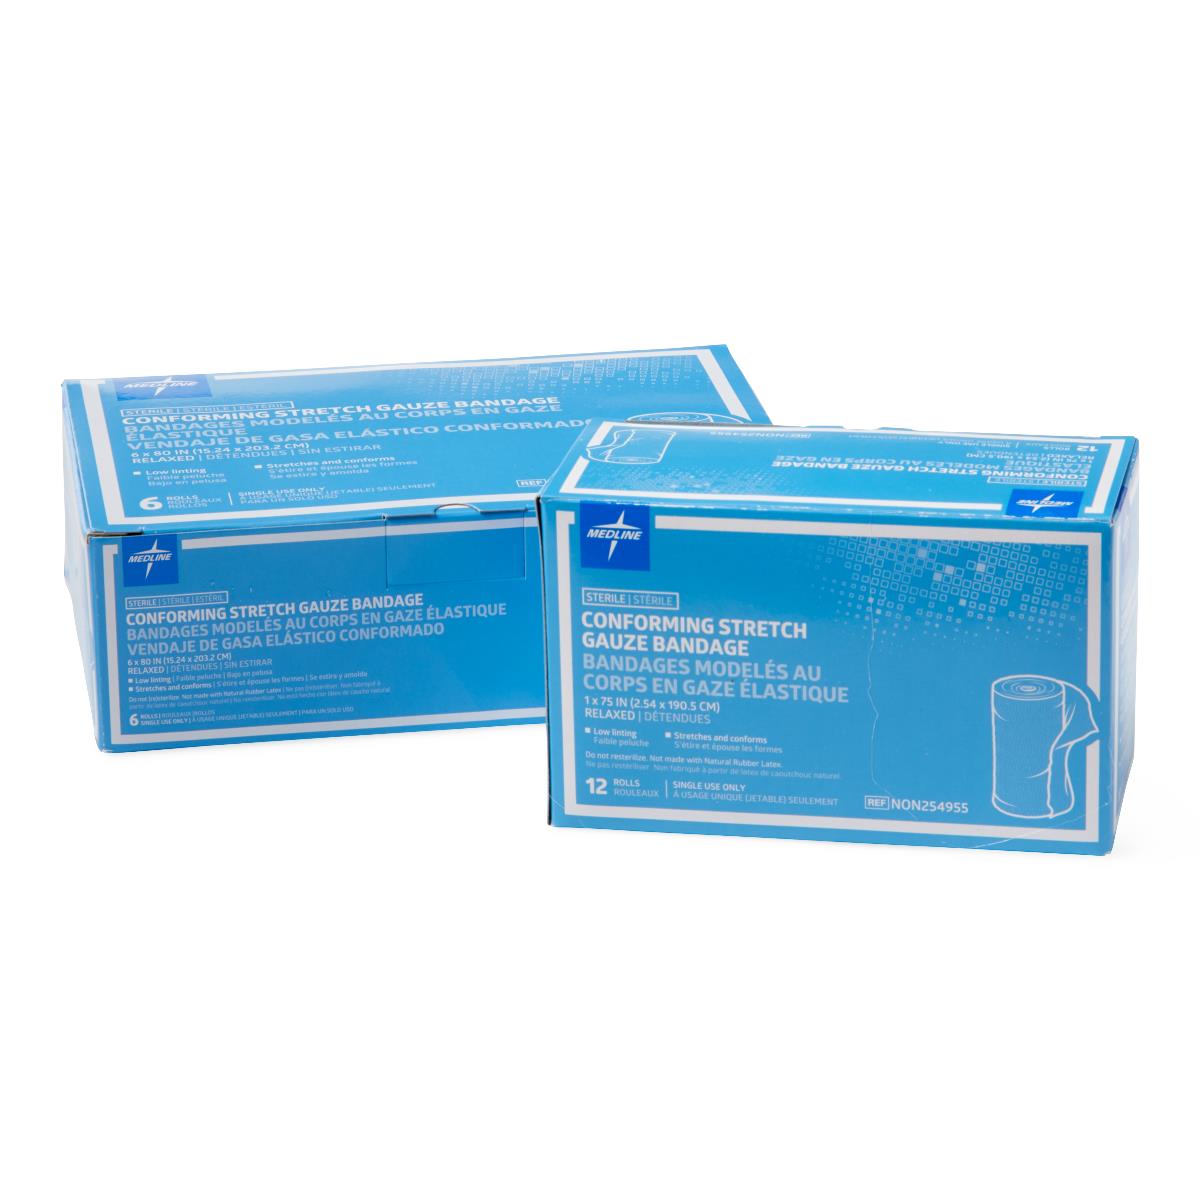 Sterile Sof-Form Conforming Bandages (2x75in) (Box of 12)